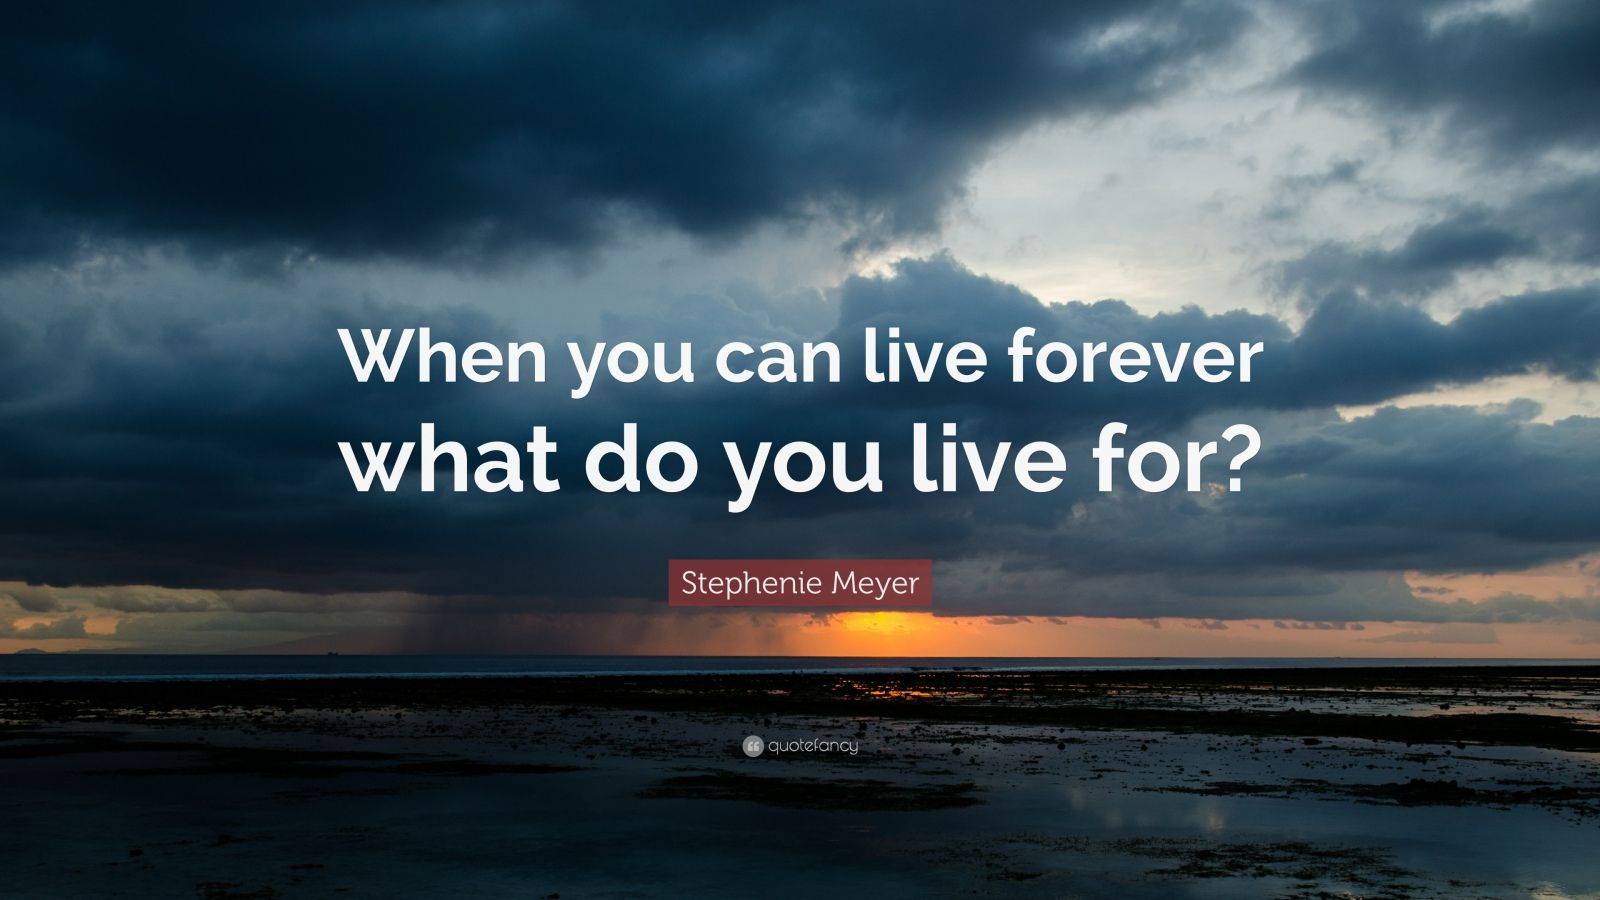 Stephenie Meyer Quote: “When you can live forever what do you live for?”